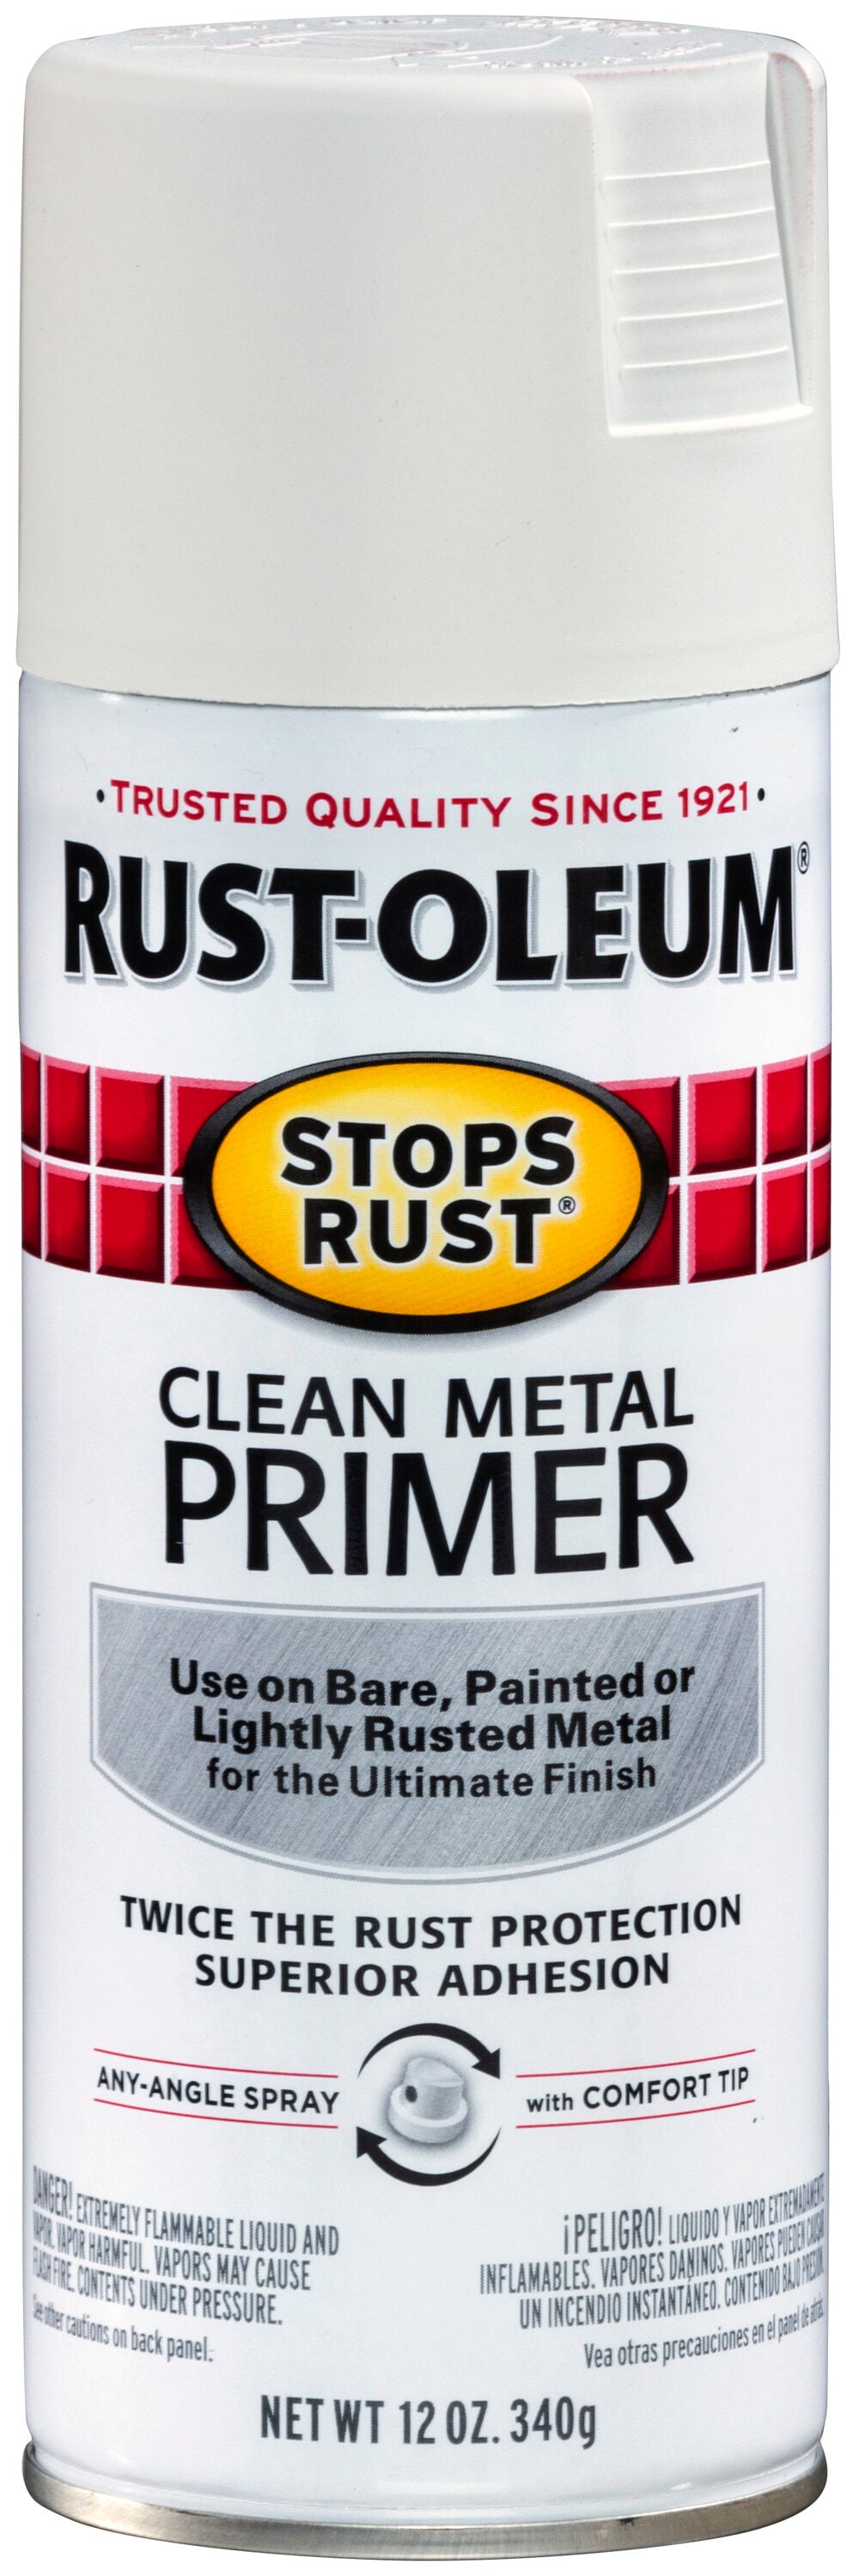 Which Rust-Oleum primer should I get? They both work on metal